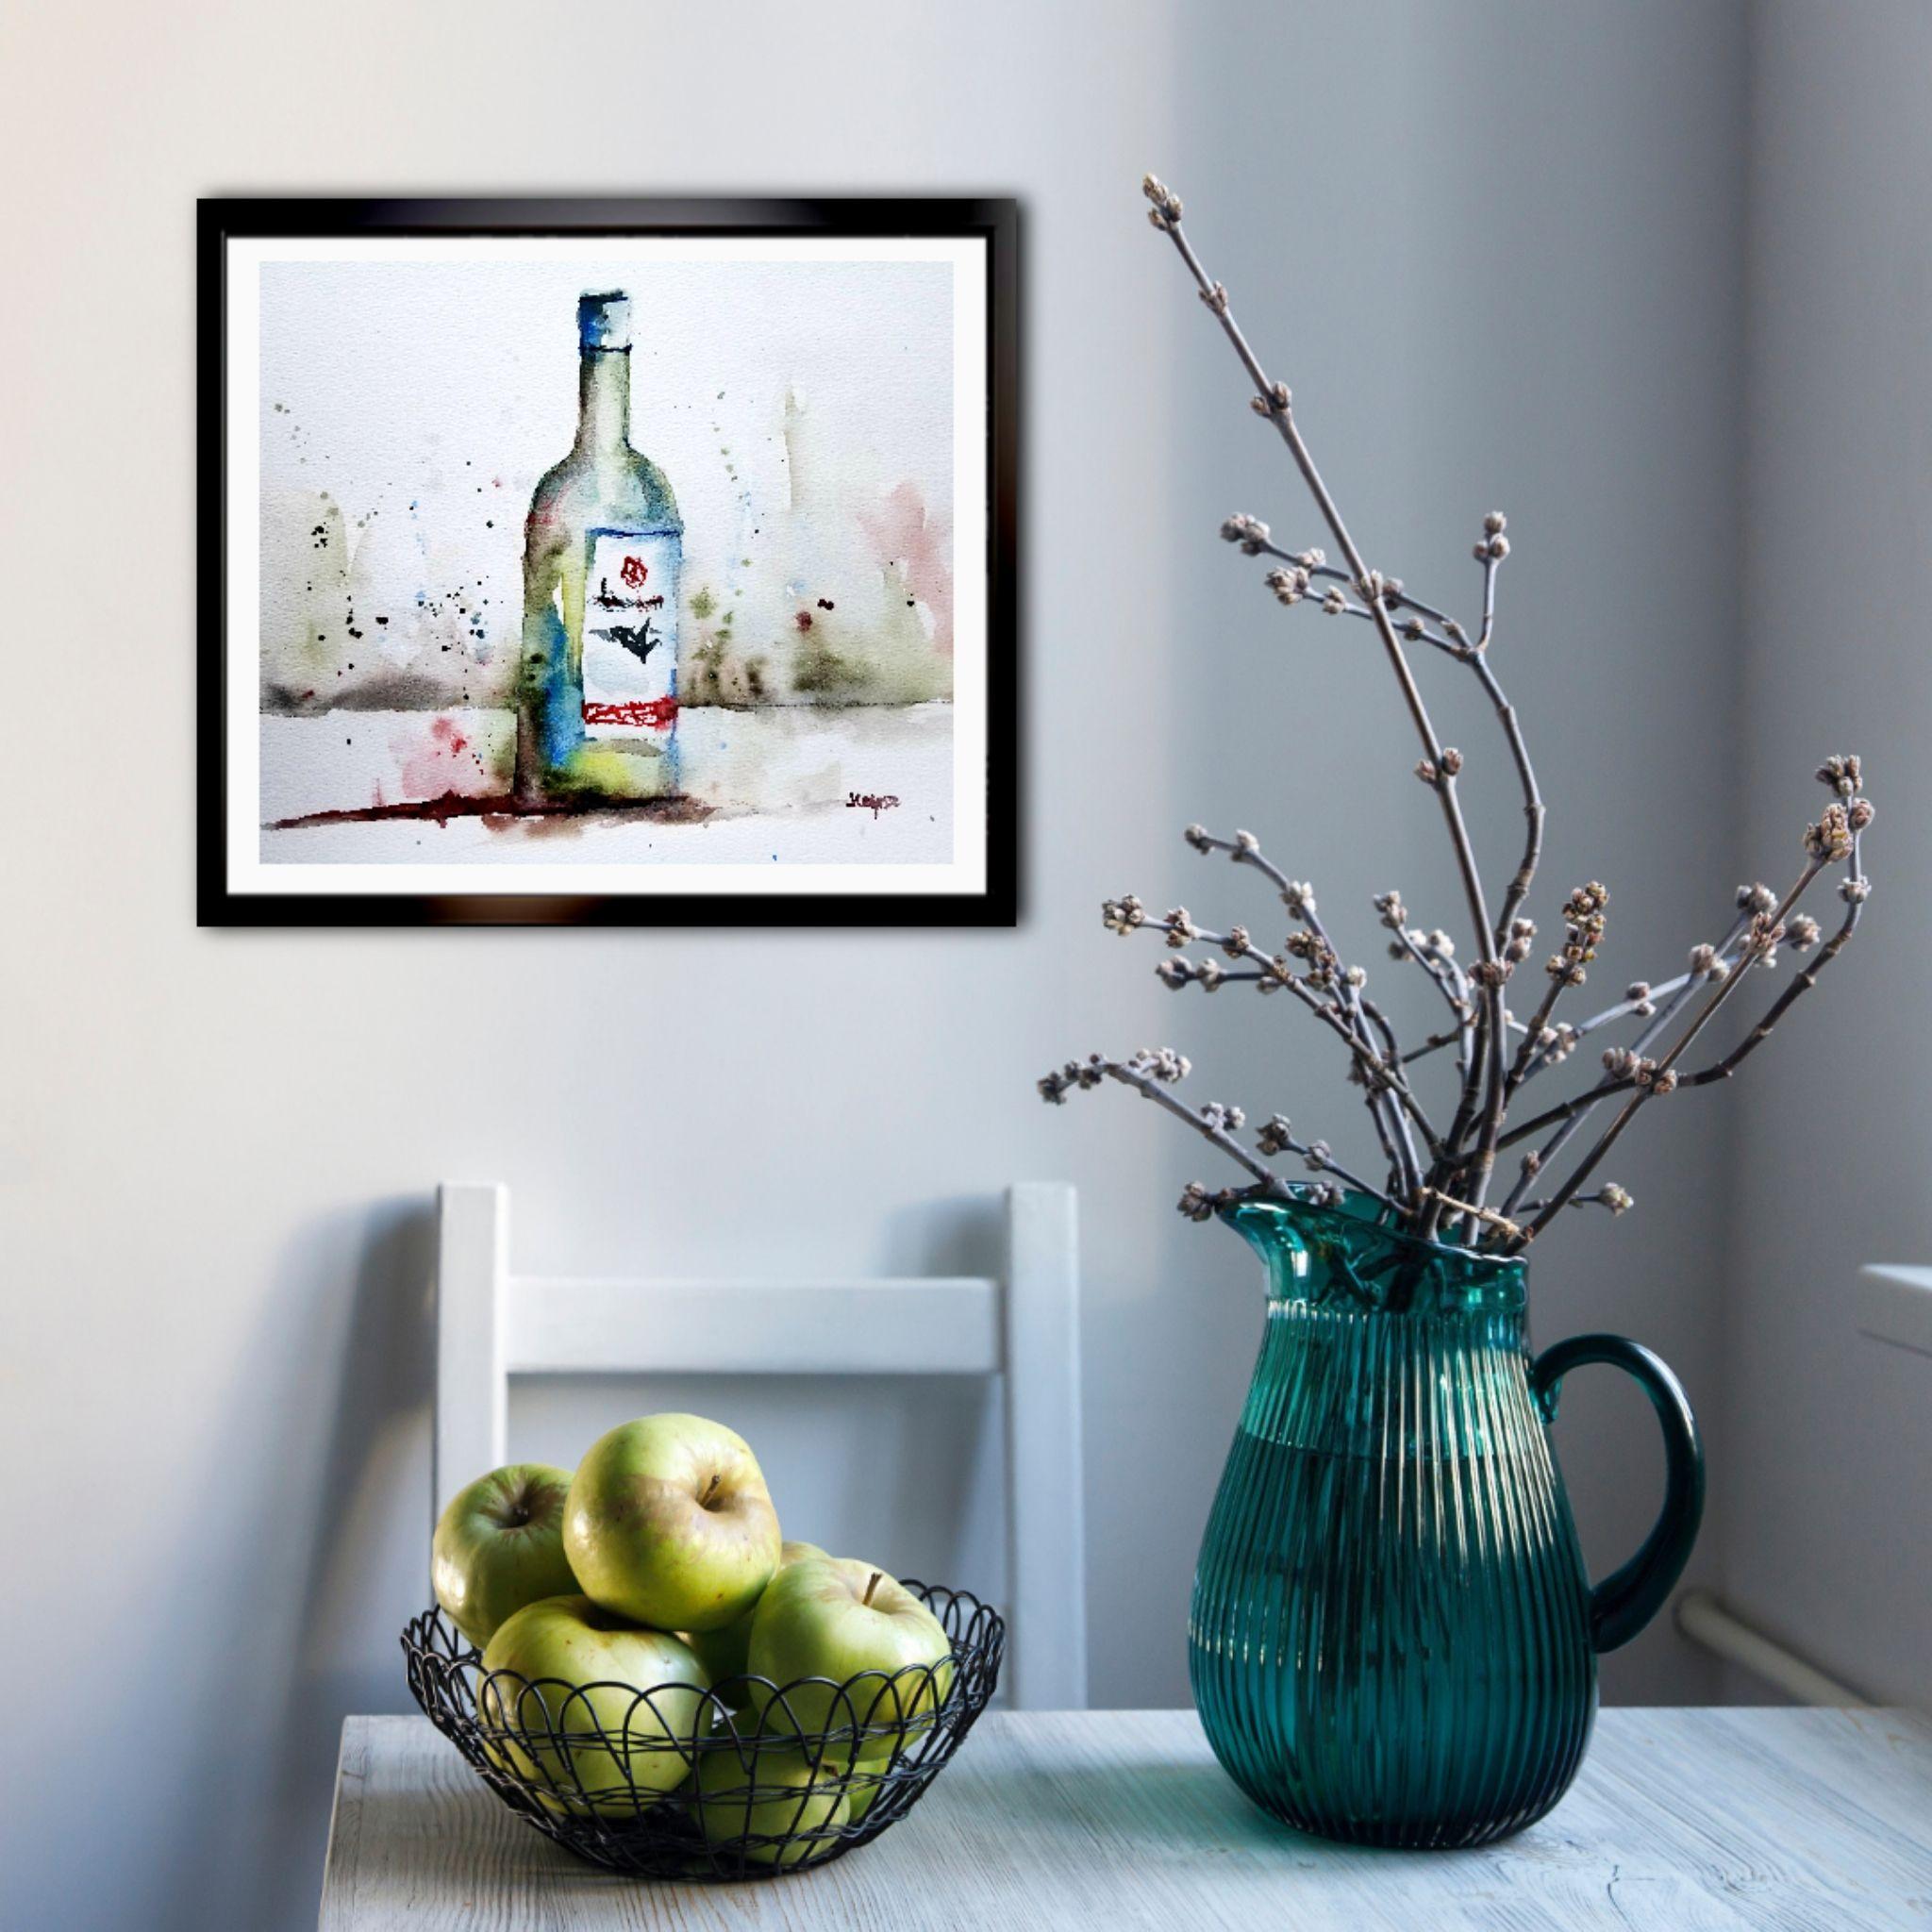 Wine Bottle, Painting, Watercolor on Watercolor Paper - Art by Jim Lagasse